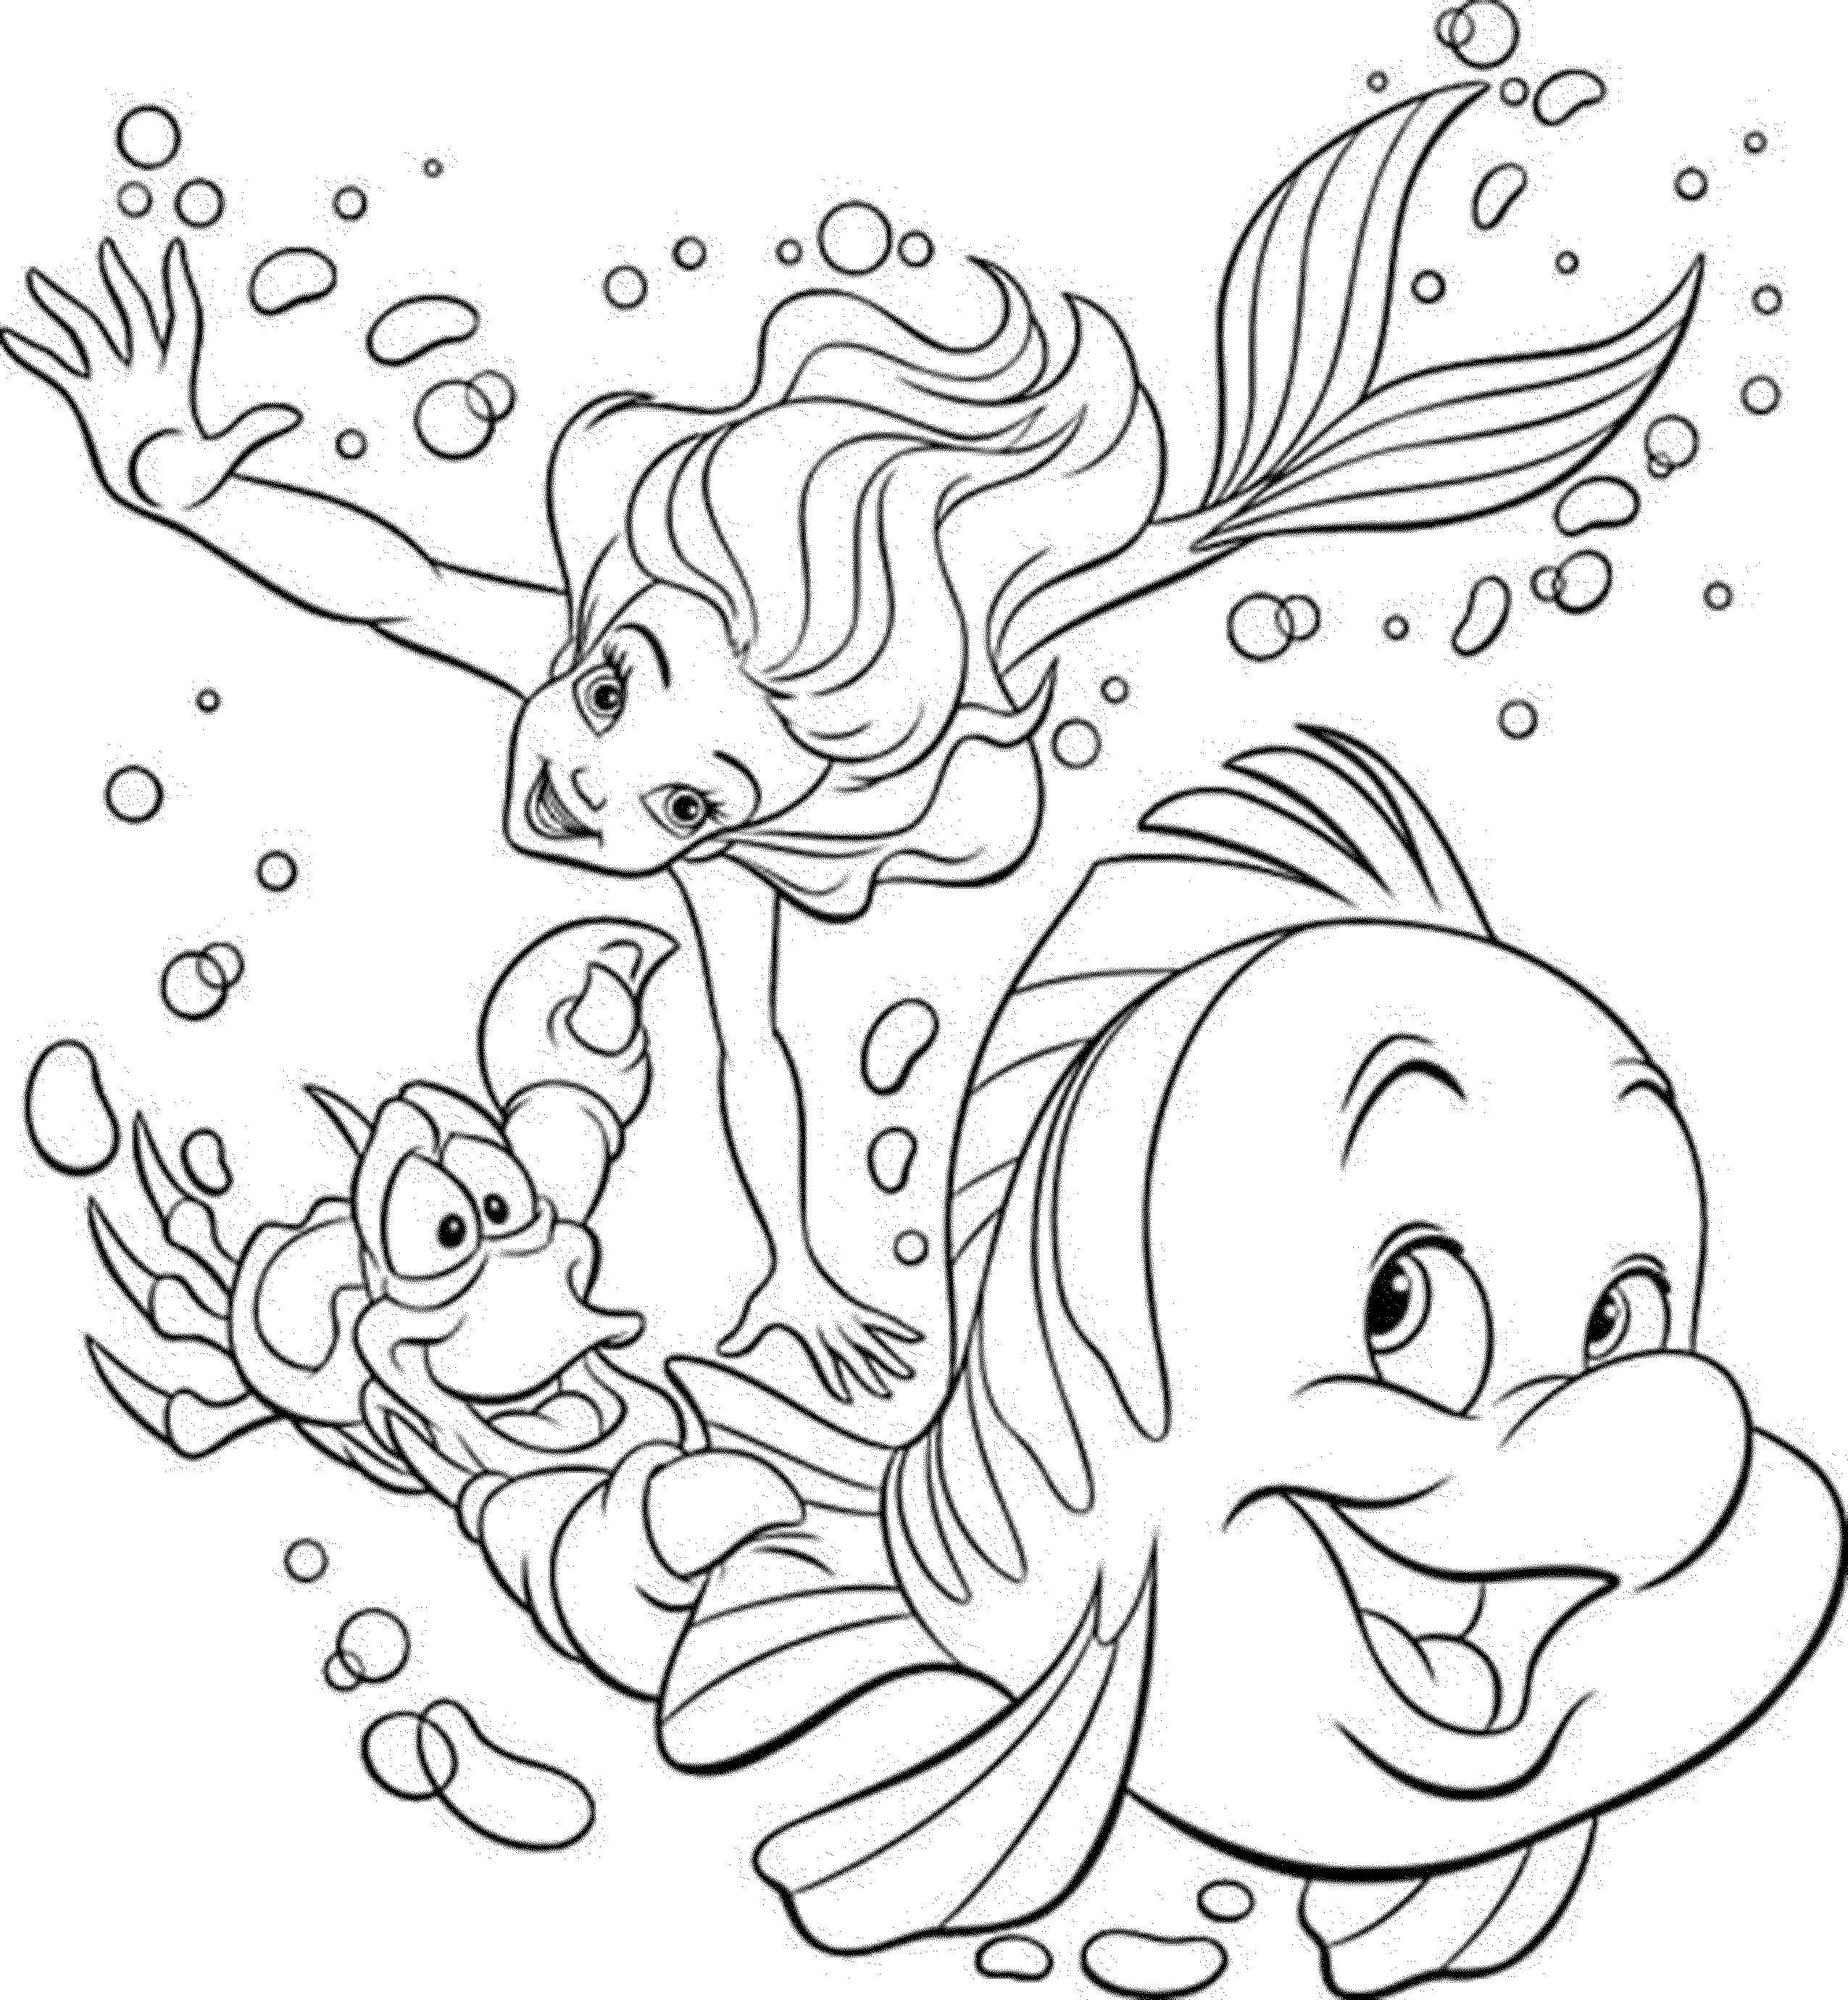 Easy Printable Princess Coloring Pages   BubaKids.com